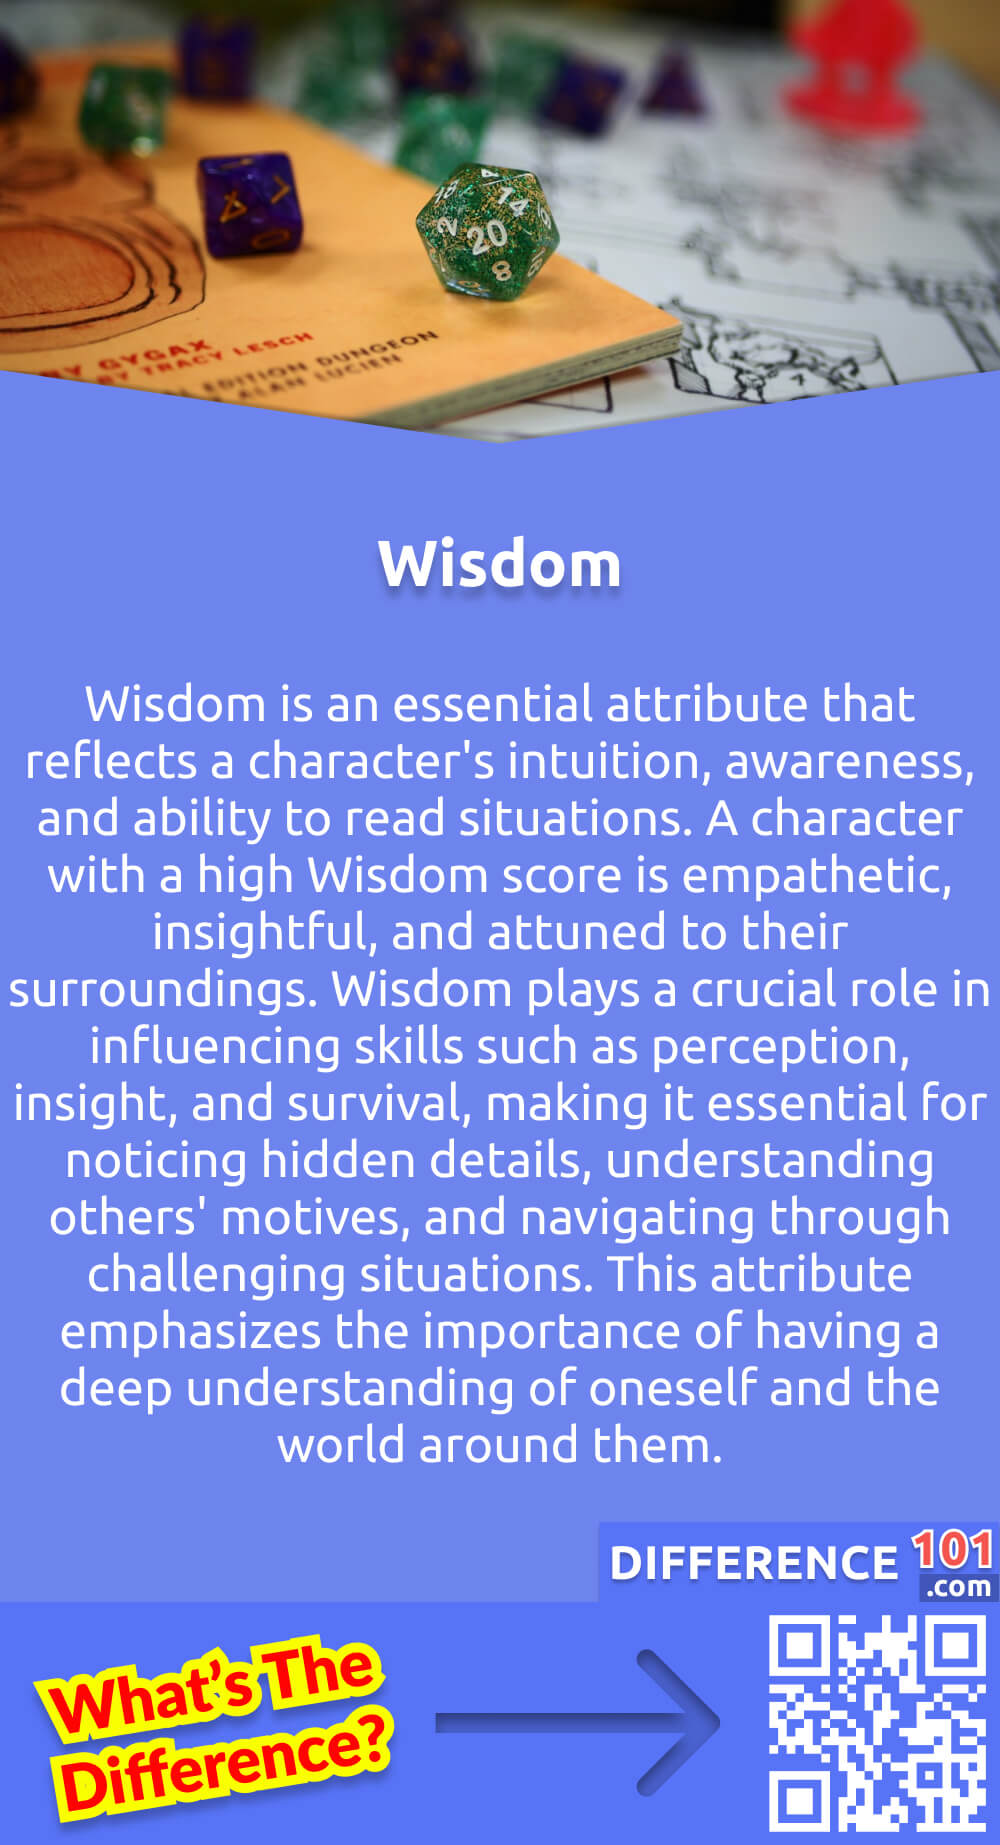 What Is Wisdom? Wisdom is an essential attribute that reflects a character's intuition, awareness, and ability to read situations. A character with a high Wisdom score is empathetic, insightful, and attuned to their surroundings. Wisdom plays a crucial role in influencing skills such as perception, insight, and survival, making it essential for noticing hidden details, understanding others' motives, and navigating through challenging situations. This attribute emphasizes the importance of having a deep understanding of oneself and the world around them. With the ability to make informed decisions and read between the lines, a character with high Wisdom can prove invaluable in any setting, whether in the wild or in a social situation.